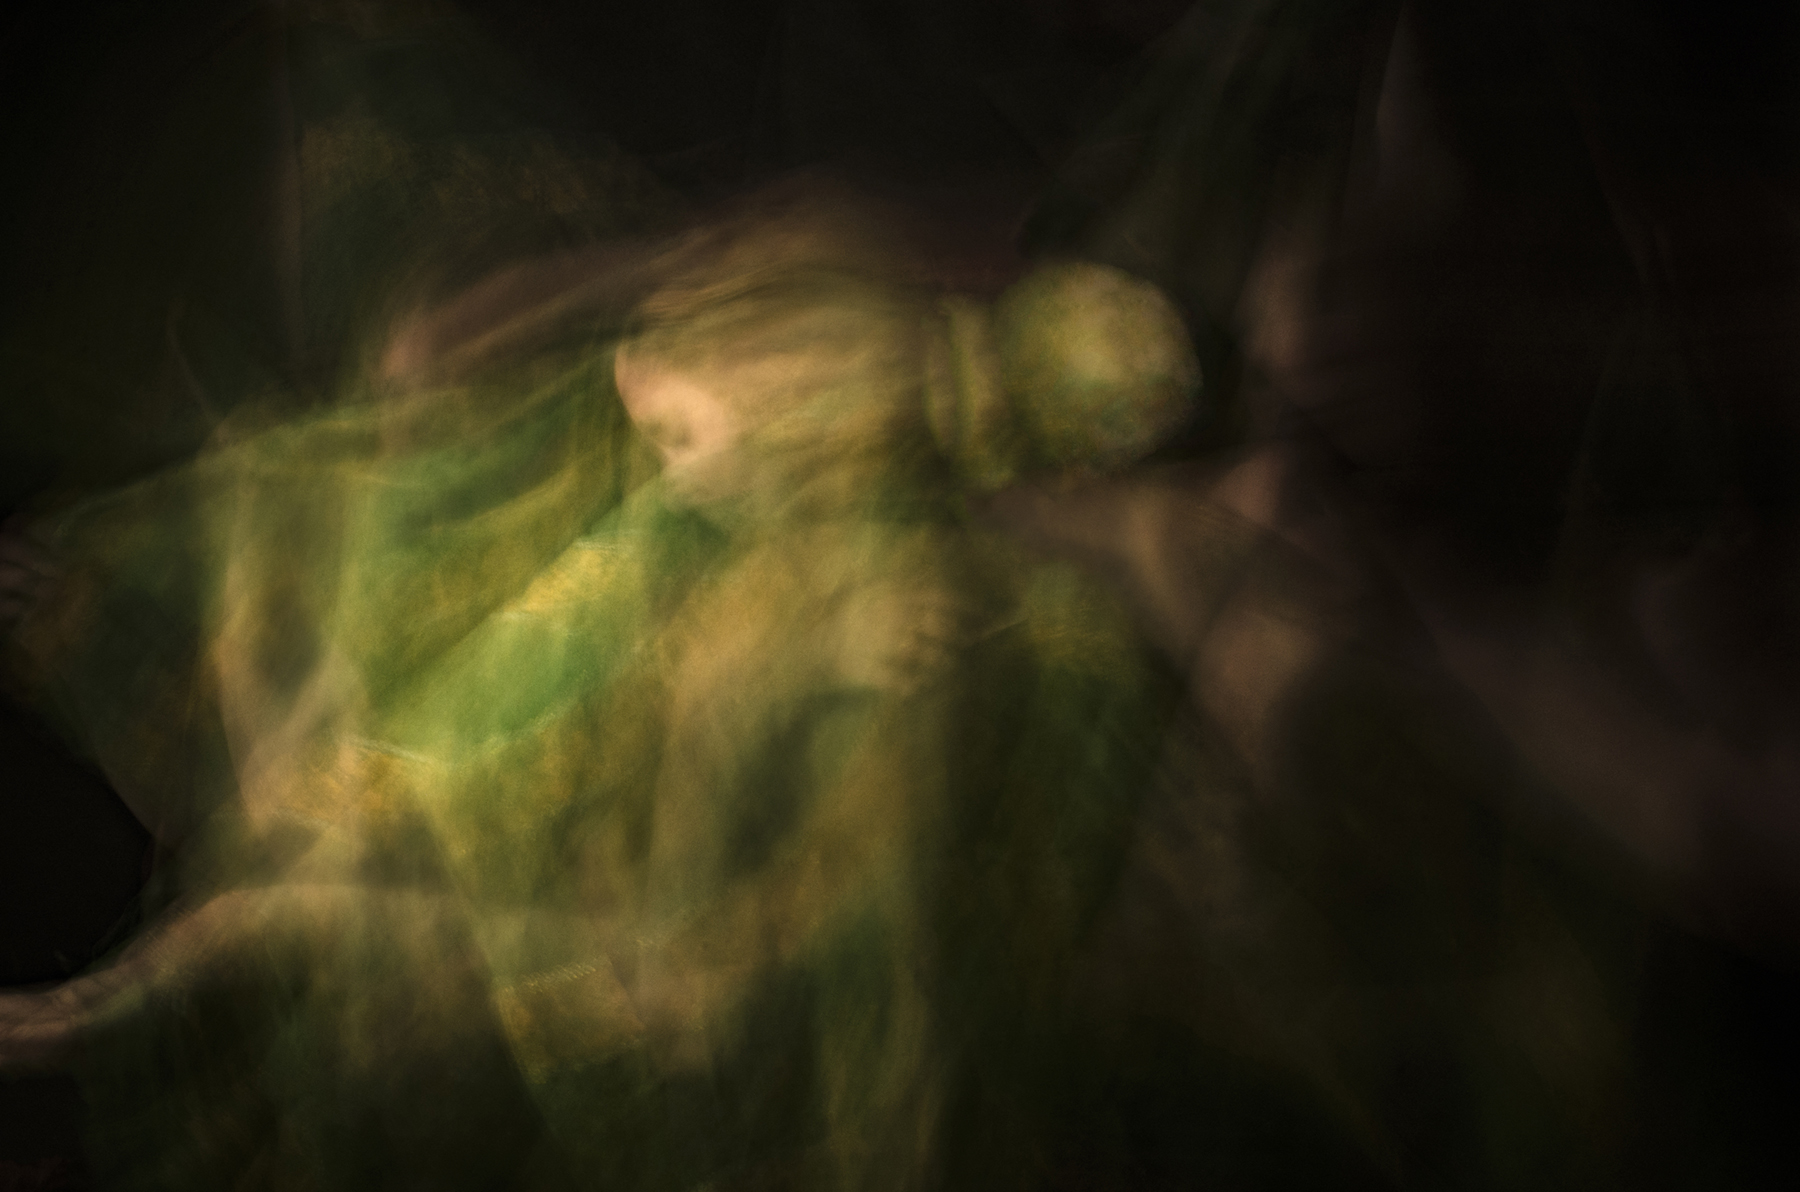 Long exposure self portrait in green, courtesy of the artist